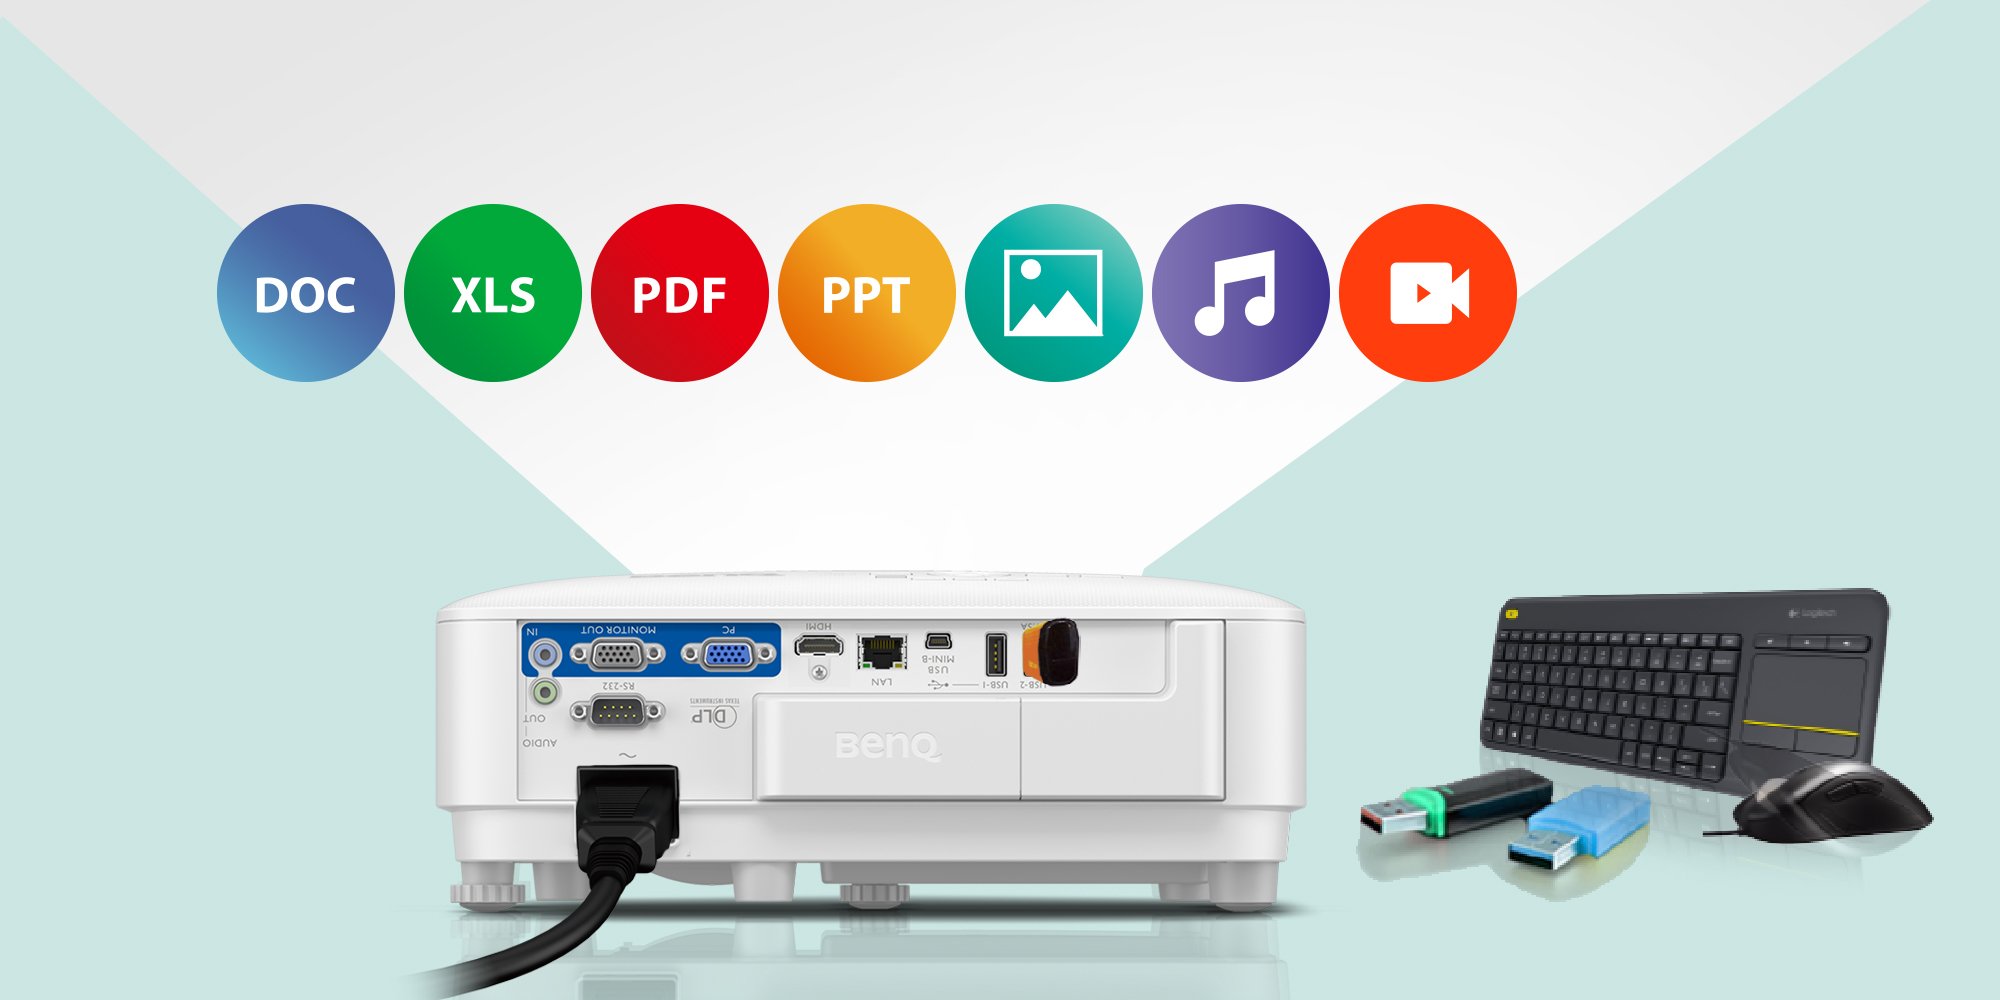 EX800ST Smart Projector supporting USB reading with a wide range of file formats